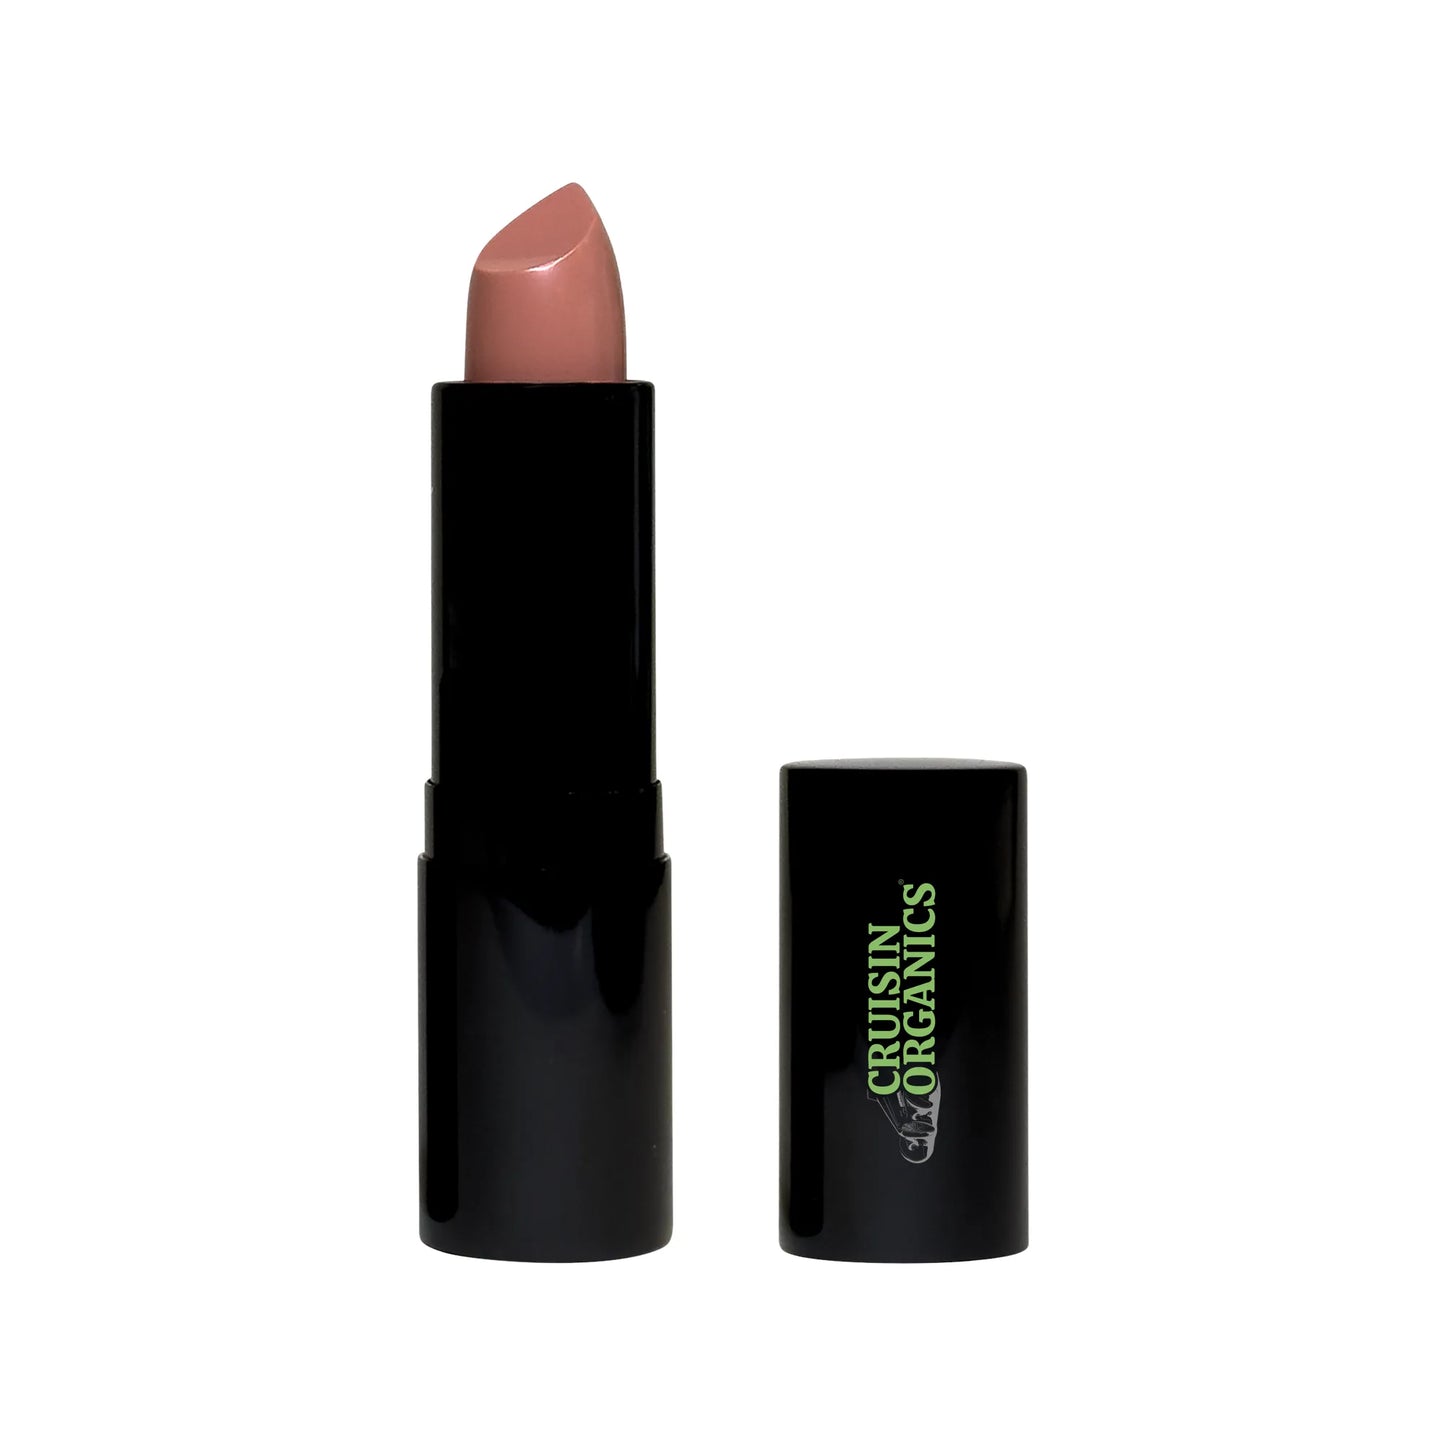 This Next to Nude Cream Lipstick by Cruisin Organics contains Camelina oil harvested from Flax Fields. Its formula provides nourishment for your lips, as well as protection against free radicals and UV rays. The blend of fatty acids and vitamin E works to replenish hydration in the skin.